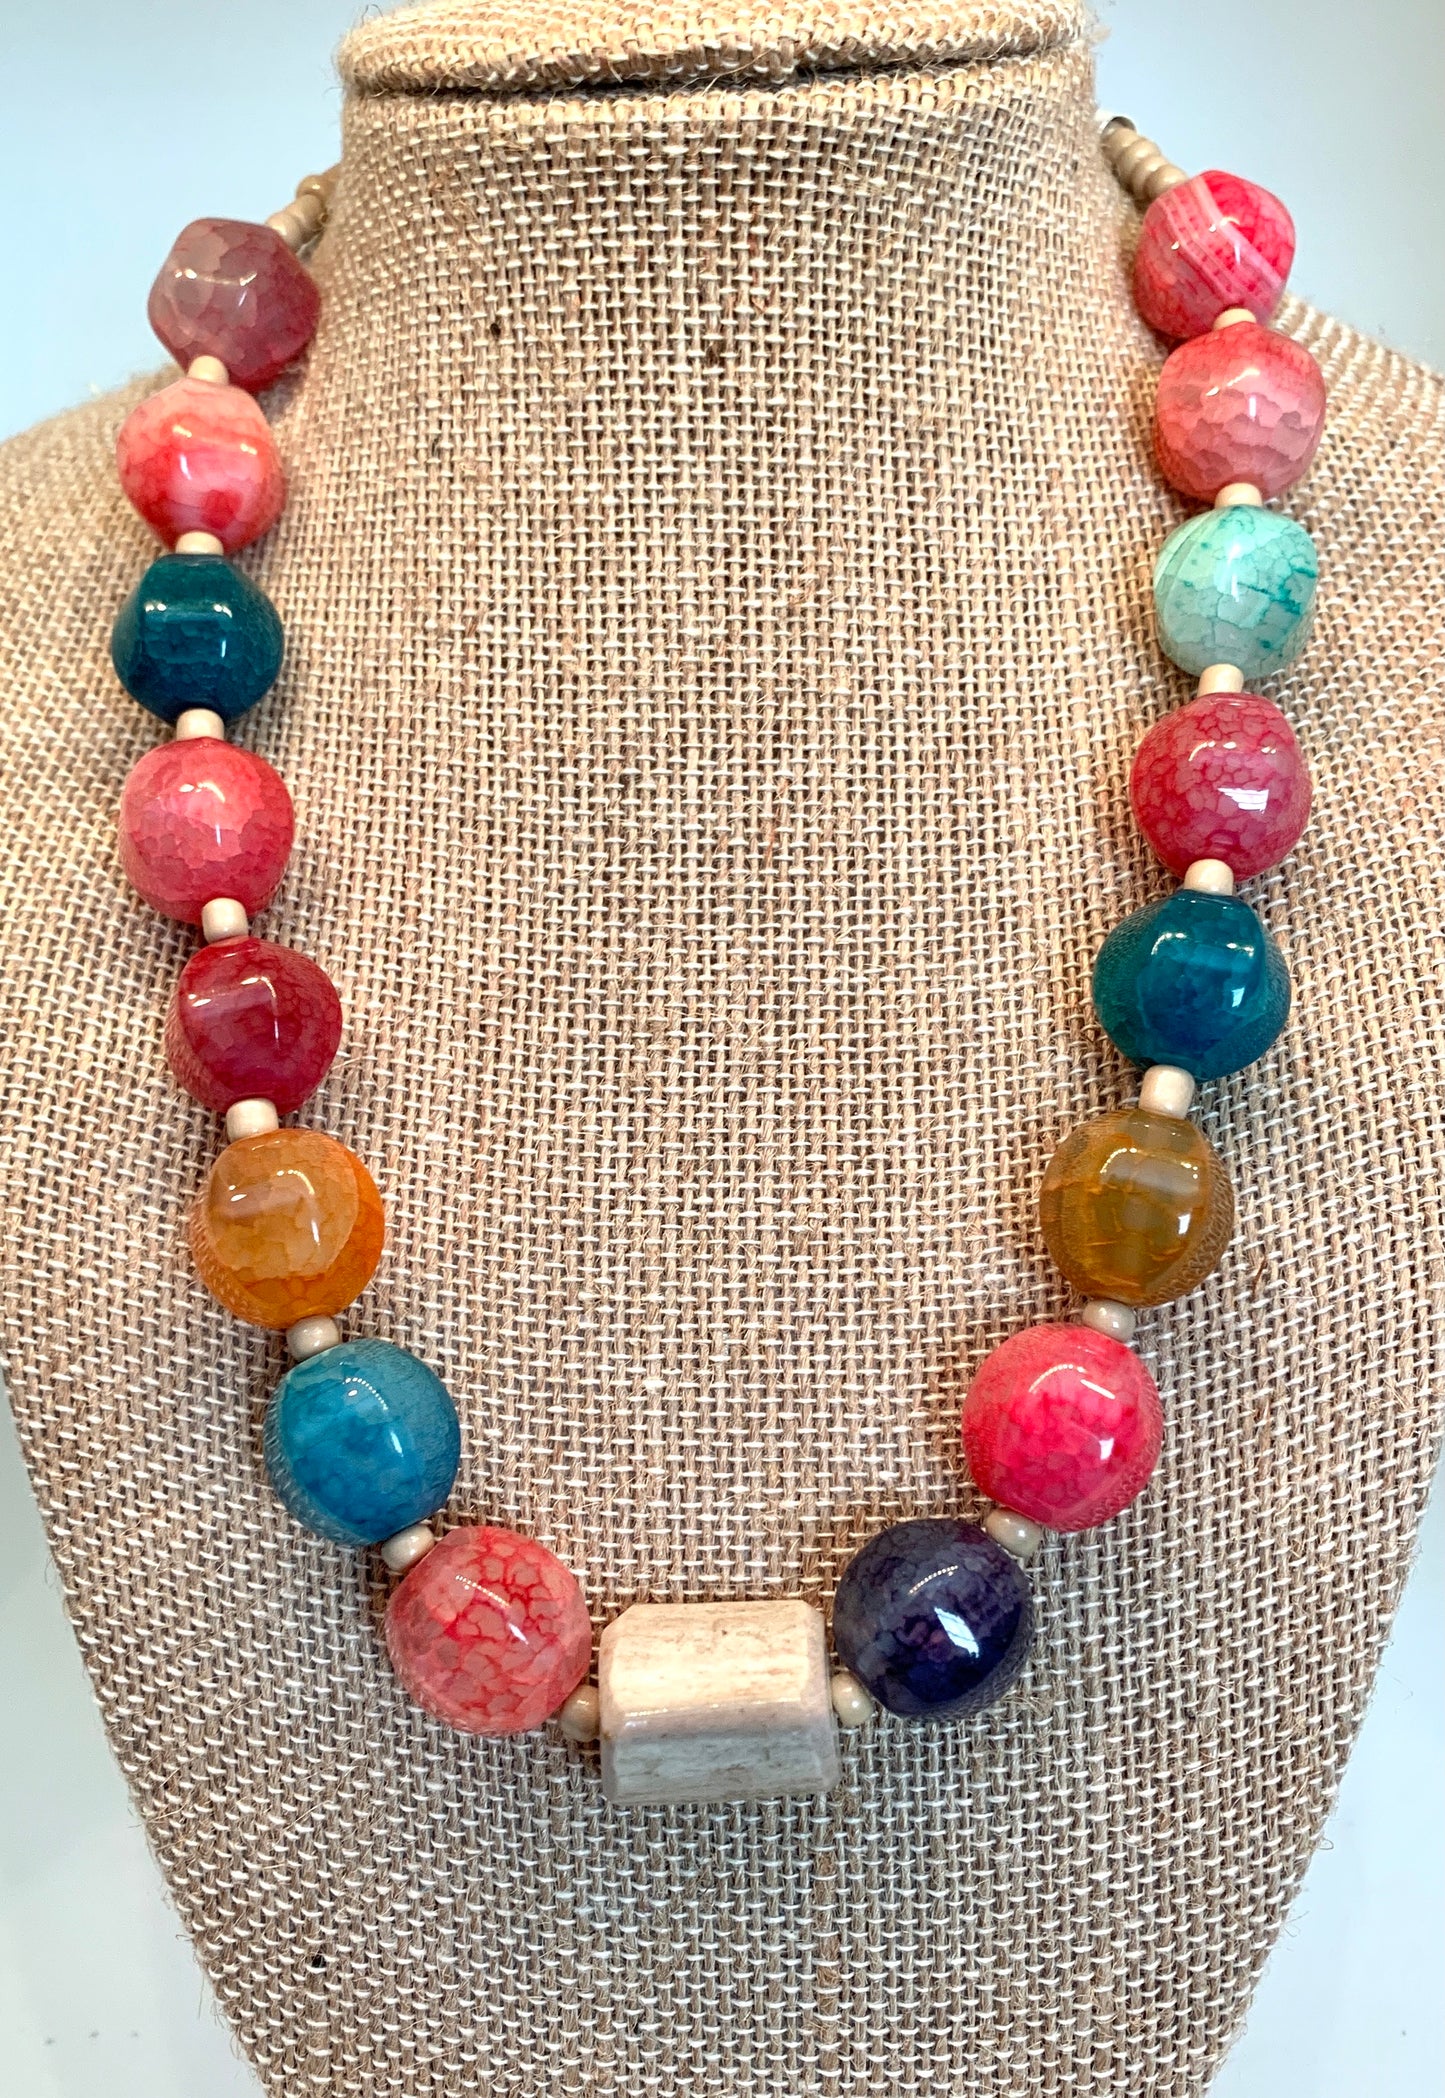 Multicolored Gum Ball Sized Beads with Antler Bead Center Piece